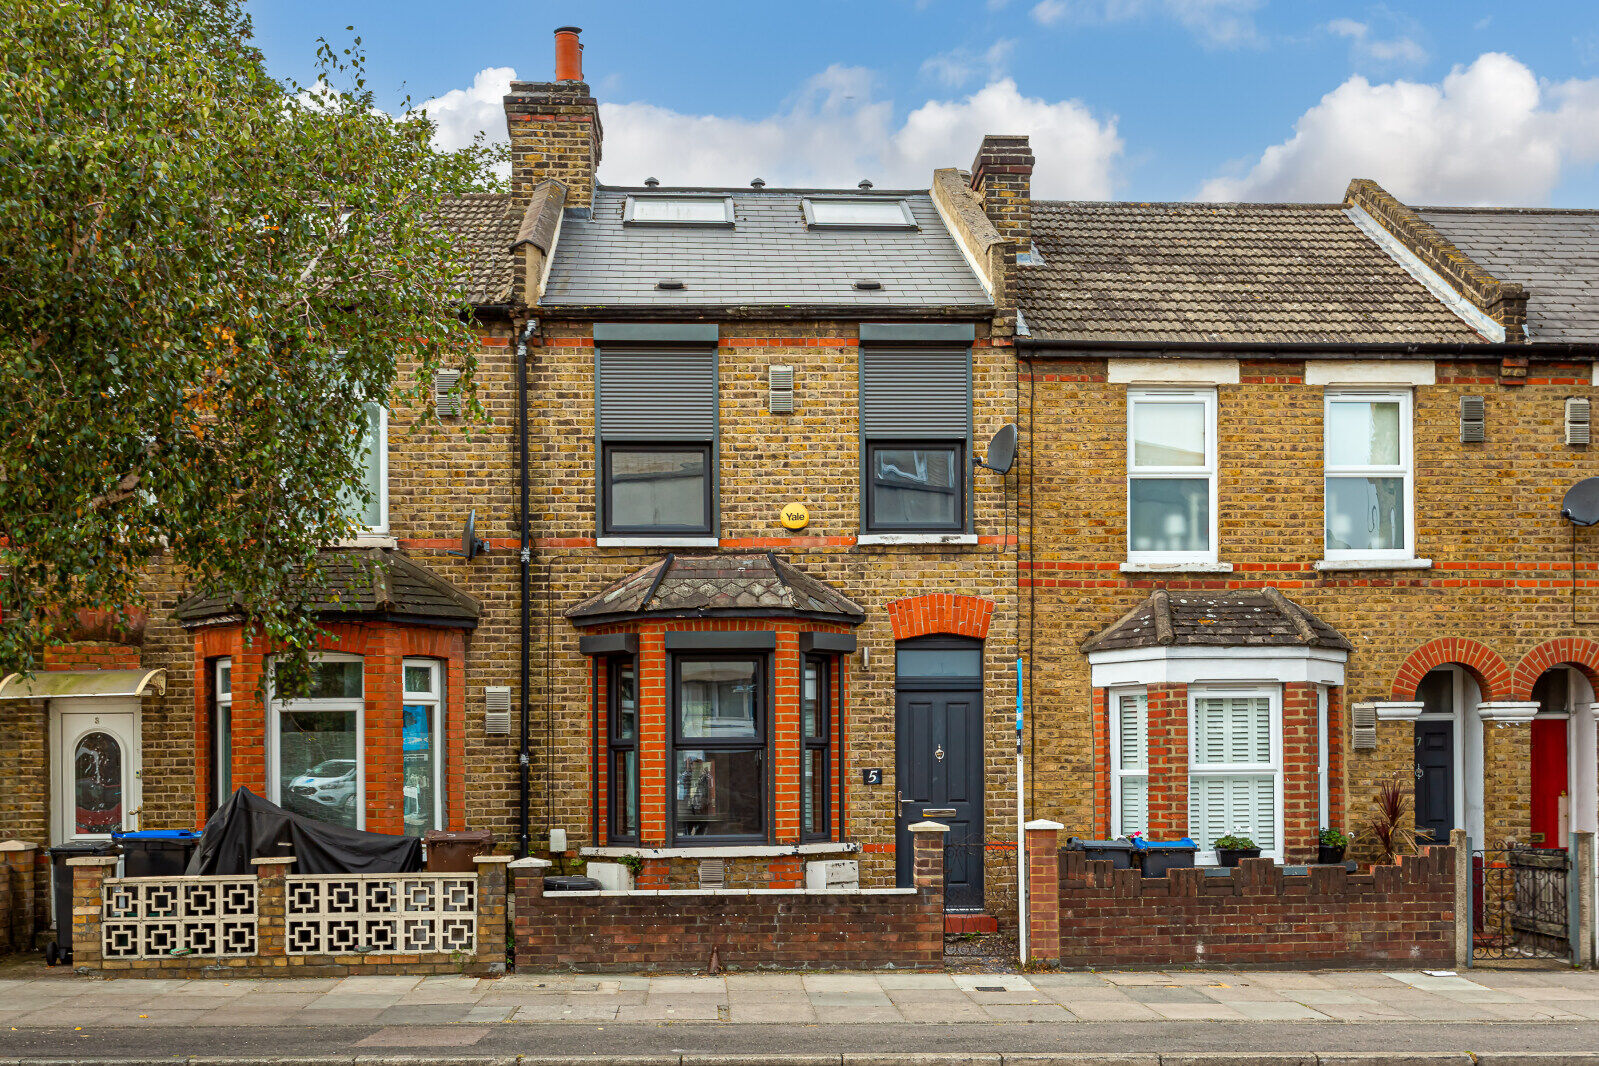 3 bedroom mid terraced house for sale Crown Road, Morden, SM4, main image